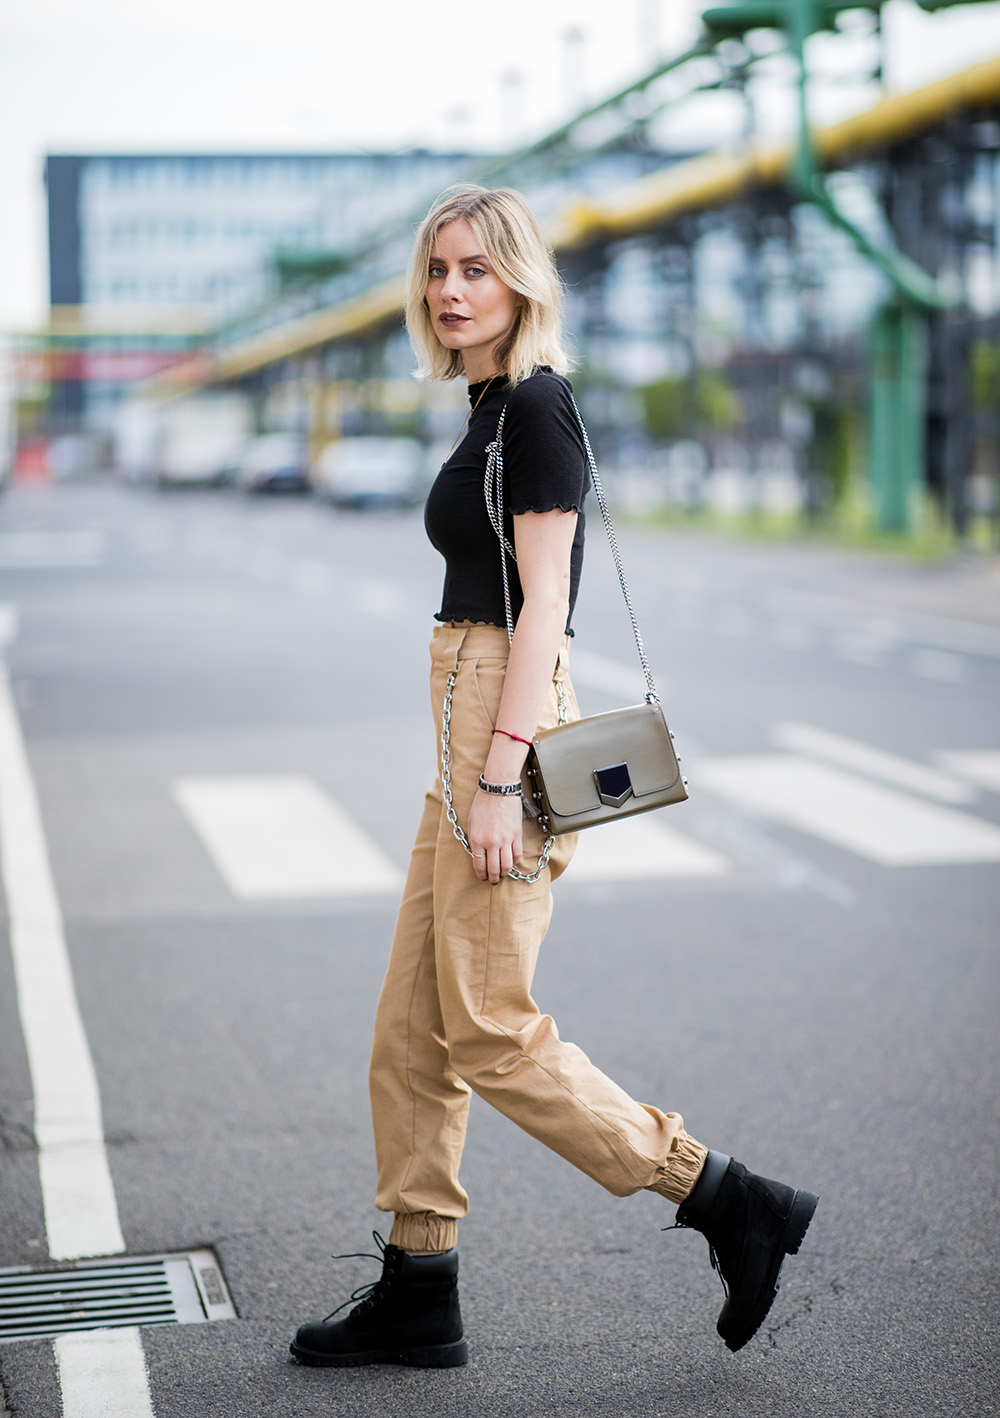 Precious Cargo: The practical pant trend that’s replacing your mom jeans (and fast) | DUESSELDORF, GERMANY - MAY 03: Lisa Hahnbueck wearing black cropped top H